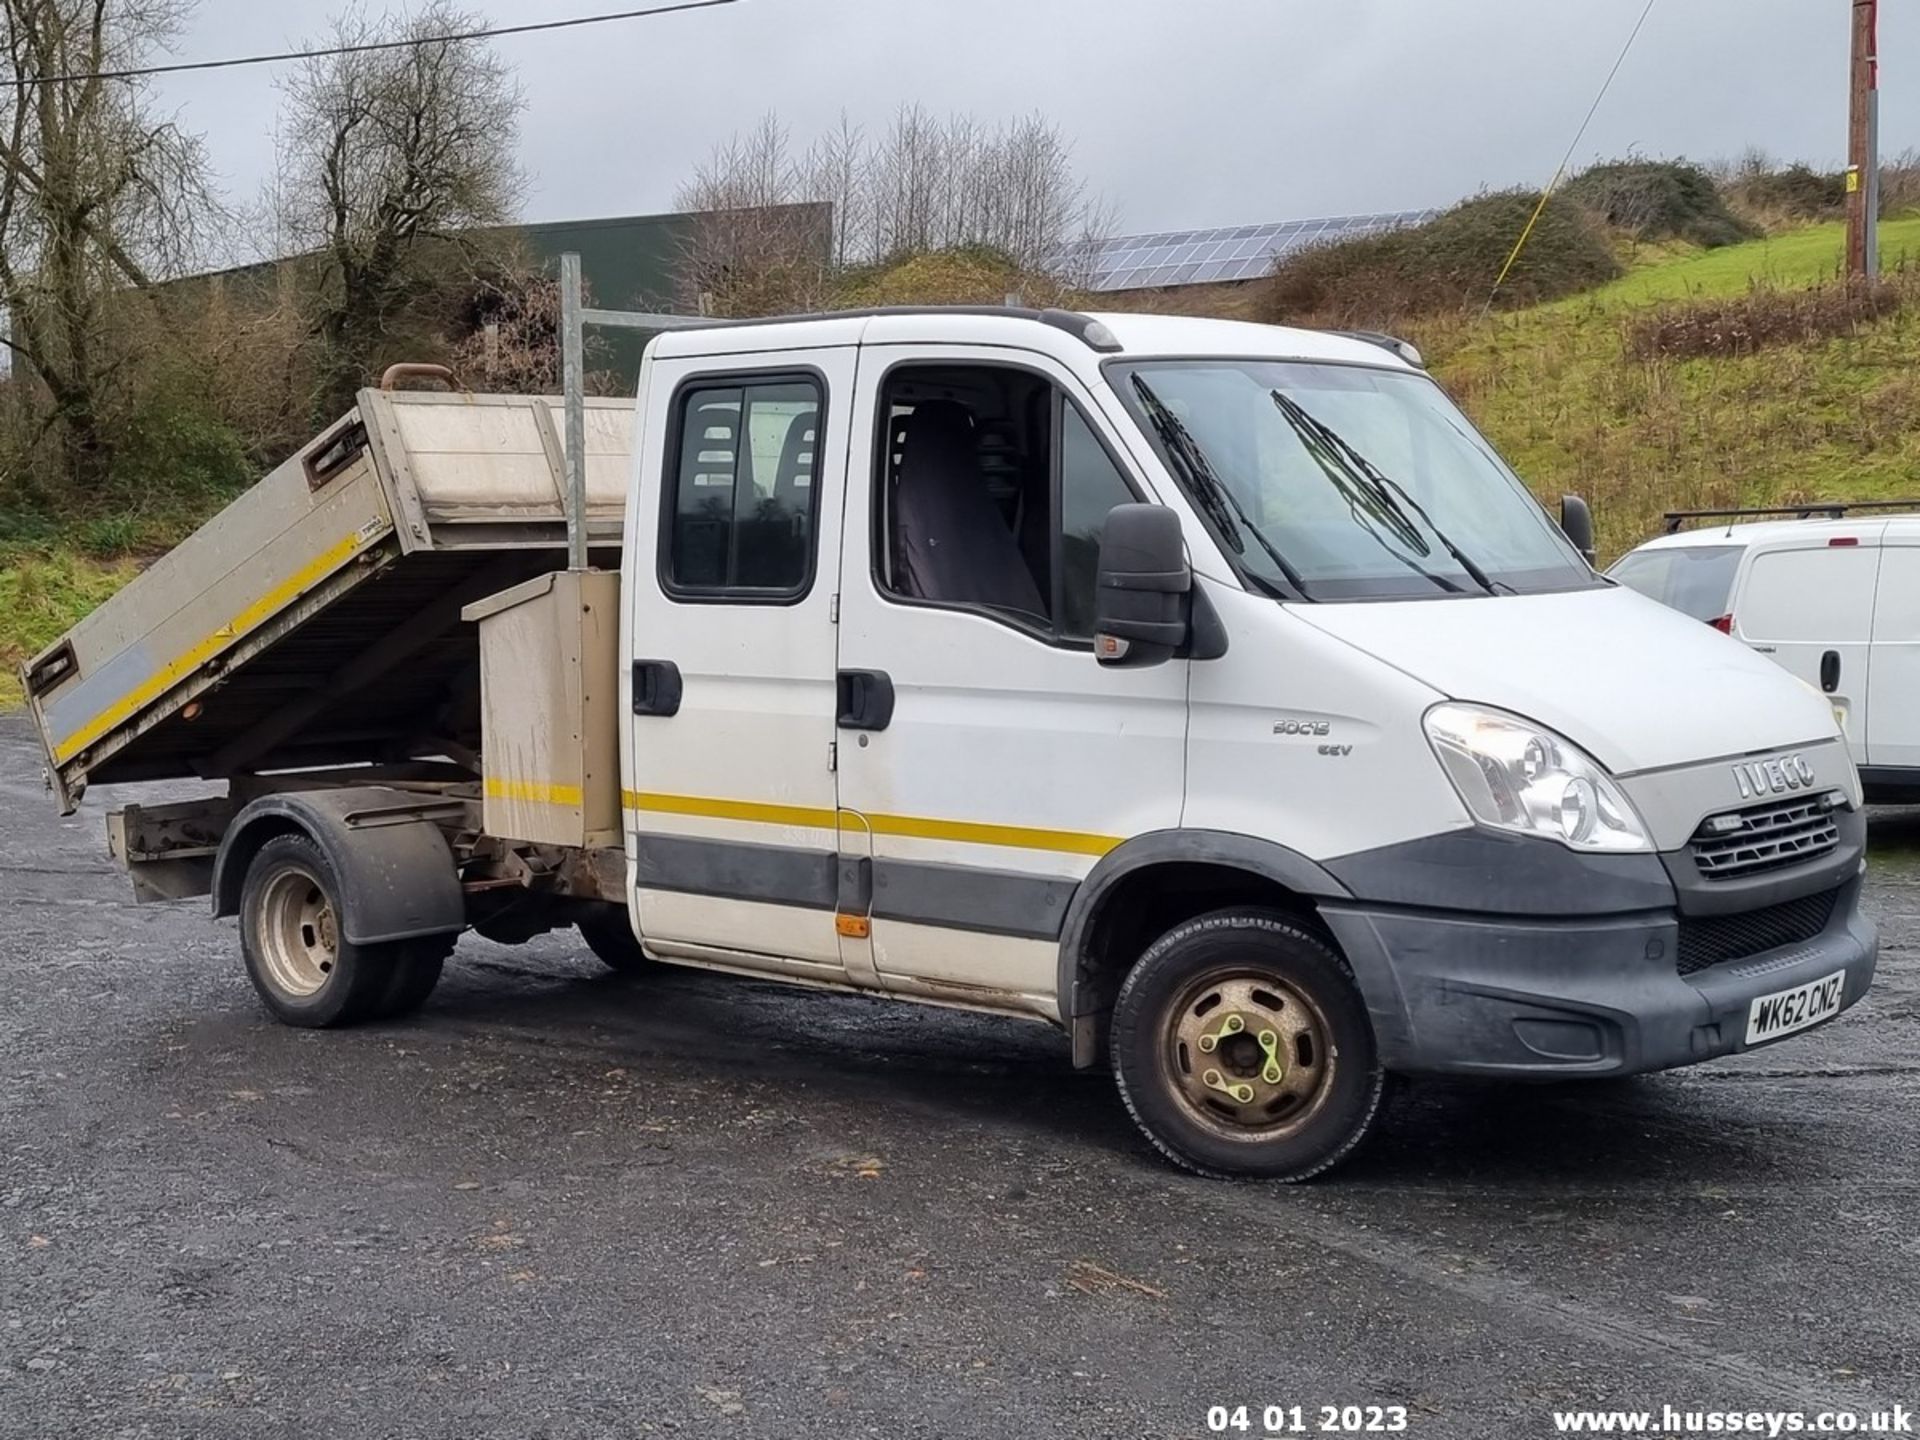 12/62 IVECO DAILY 50C15 - 2998cc 4dr Tipper (White, 86k)